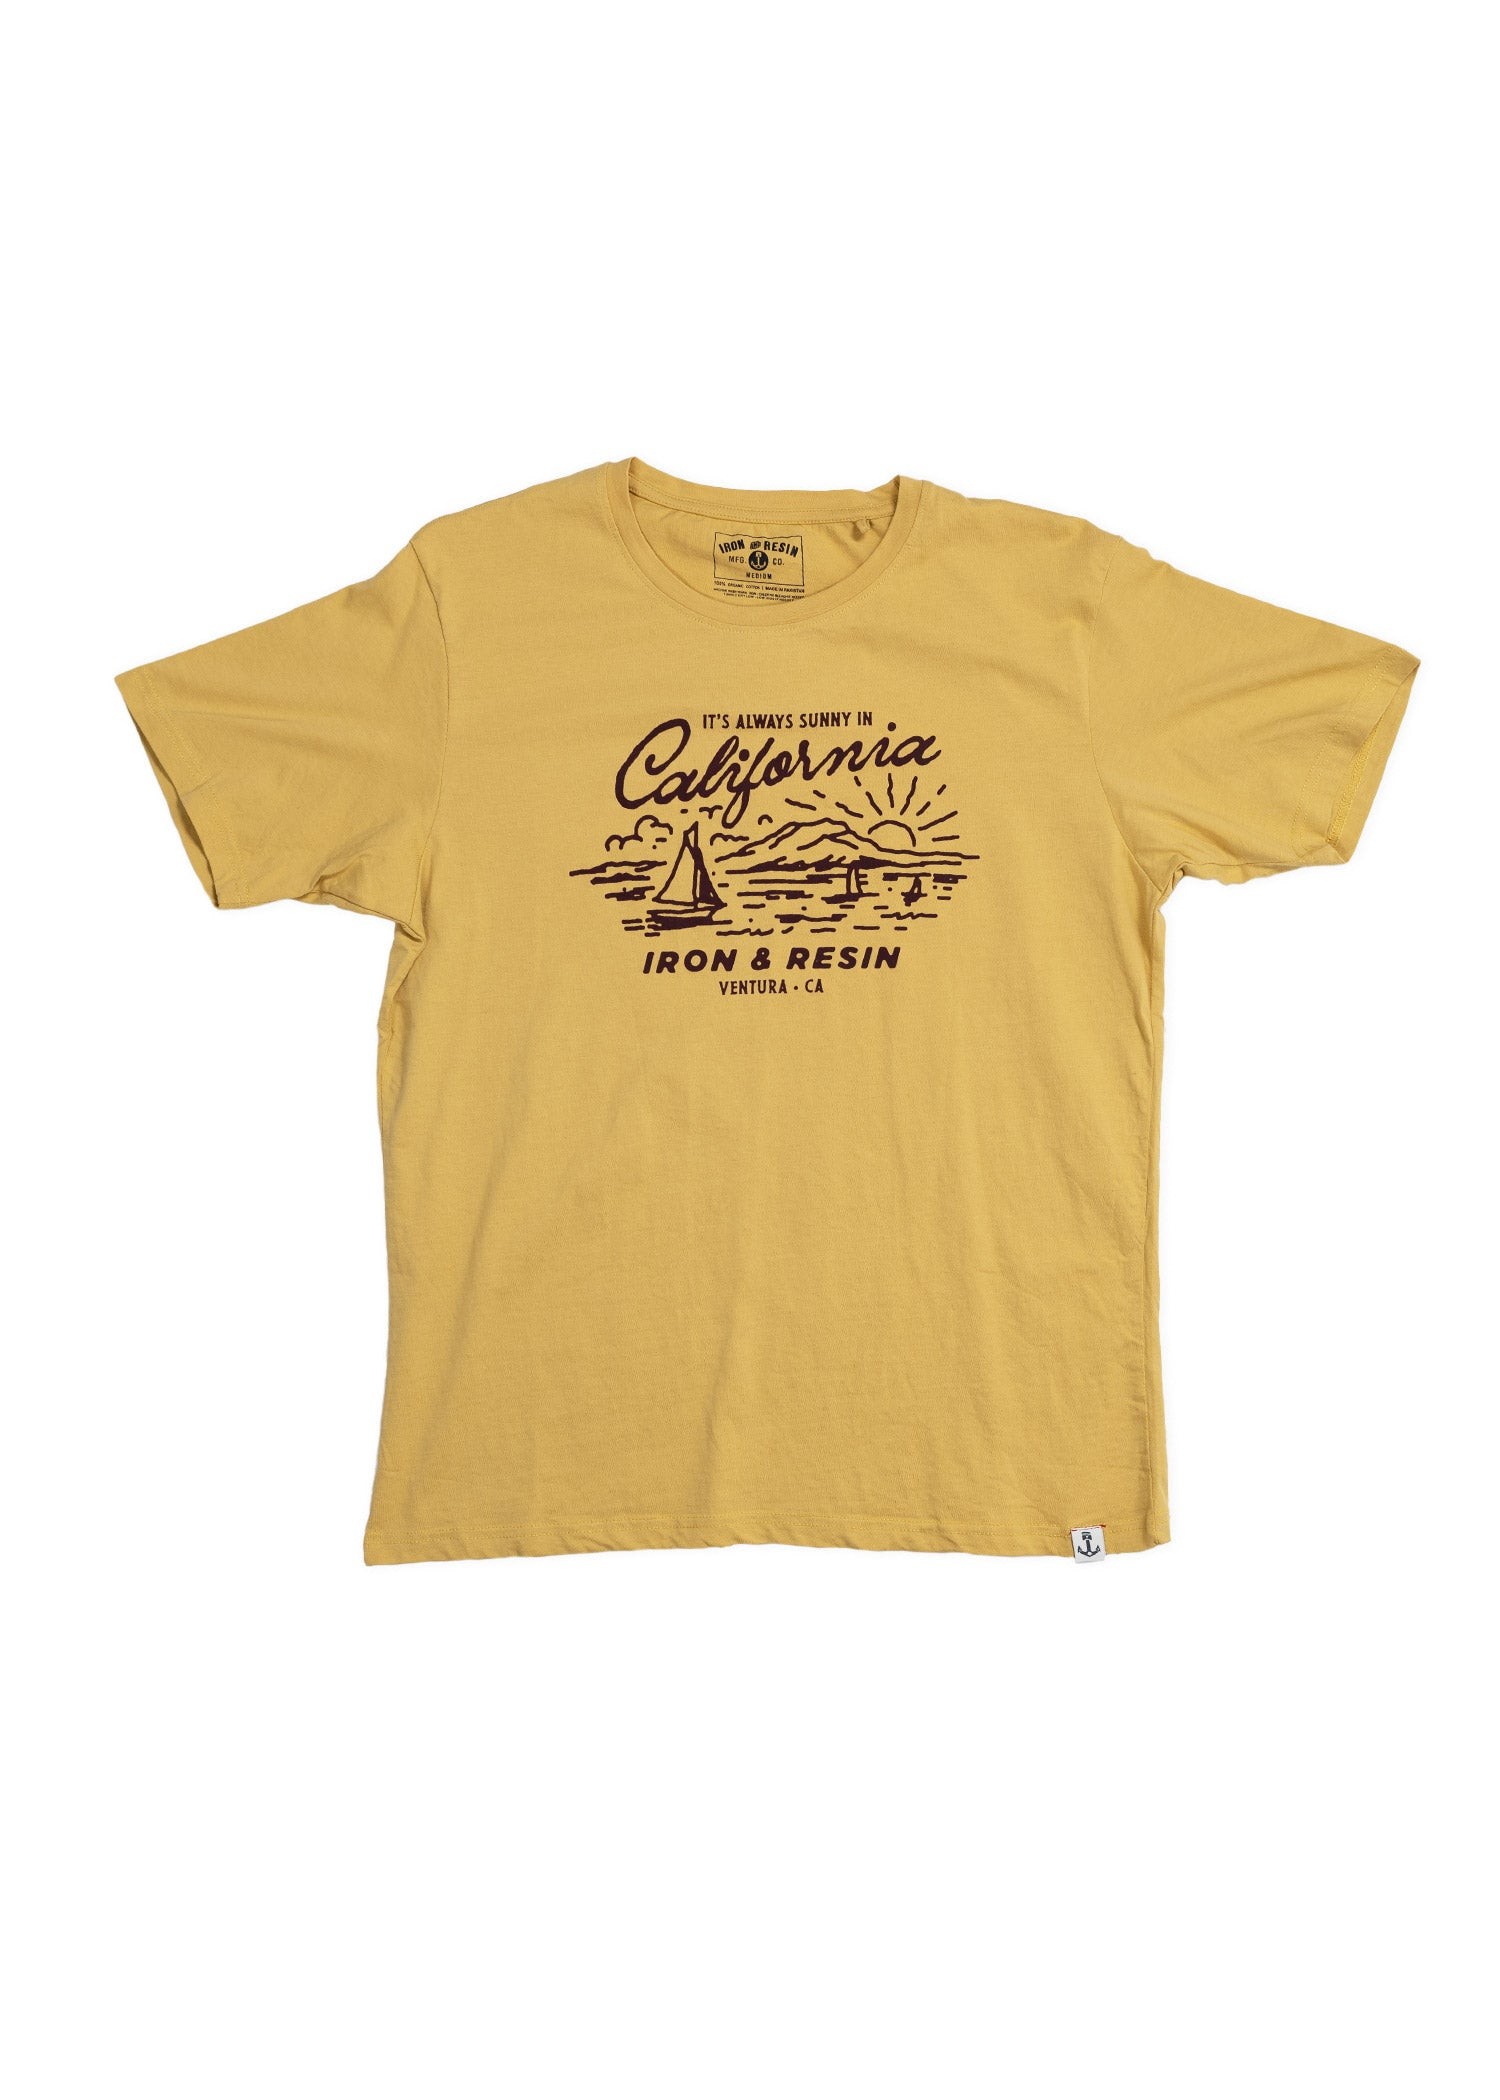 Always sunny - T-shirt homme homme - Accueil